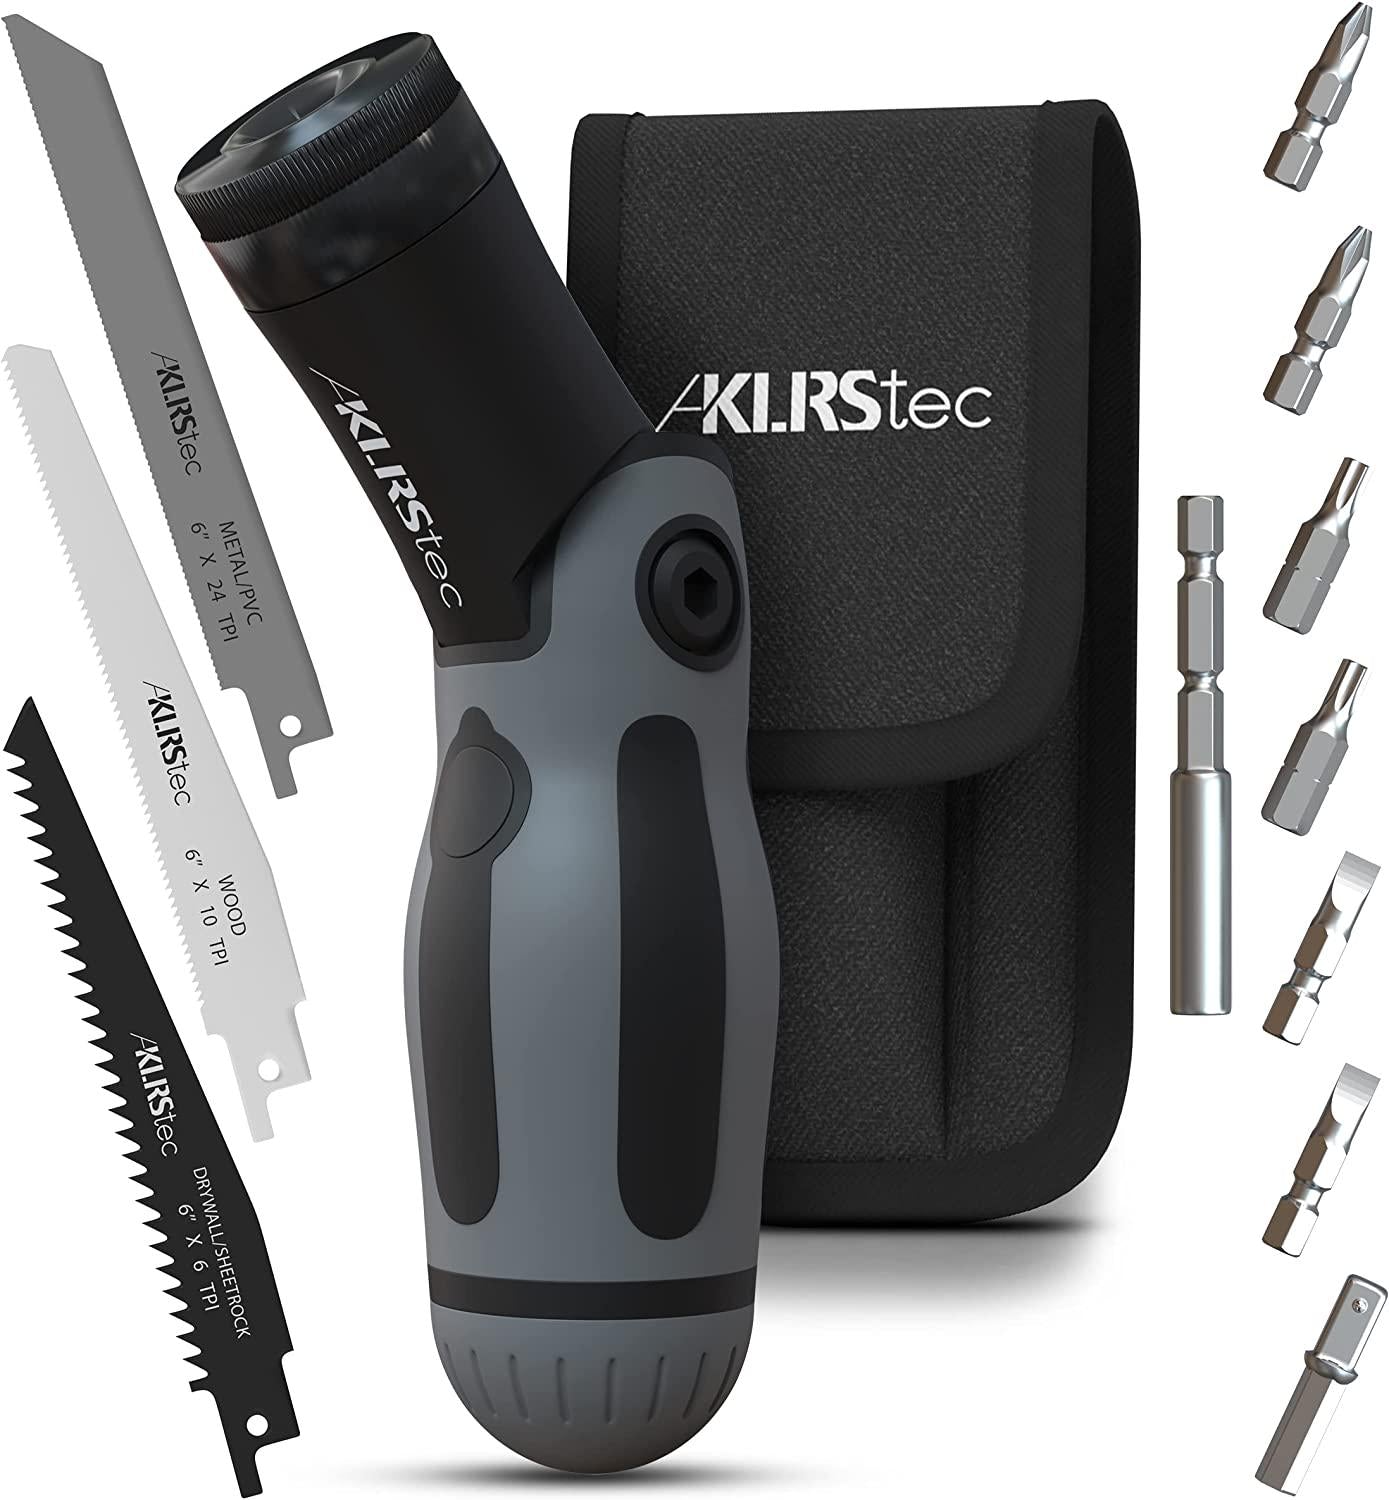 KLRS, KLRStec Professional Multitool 2 in 1 - bit Screwdriver Set and Hand Jigsaw in one 12 Pieces